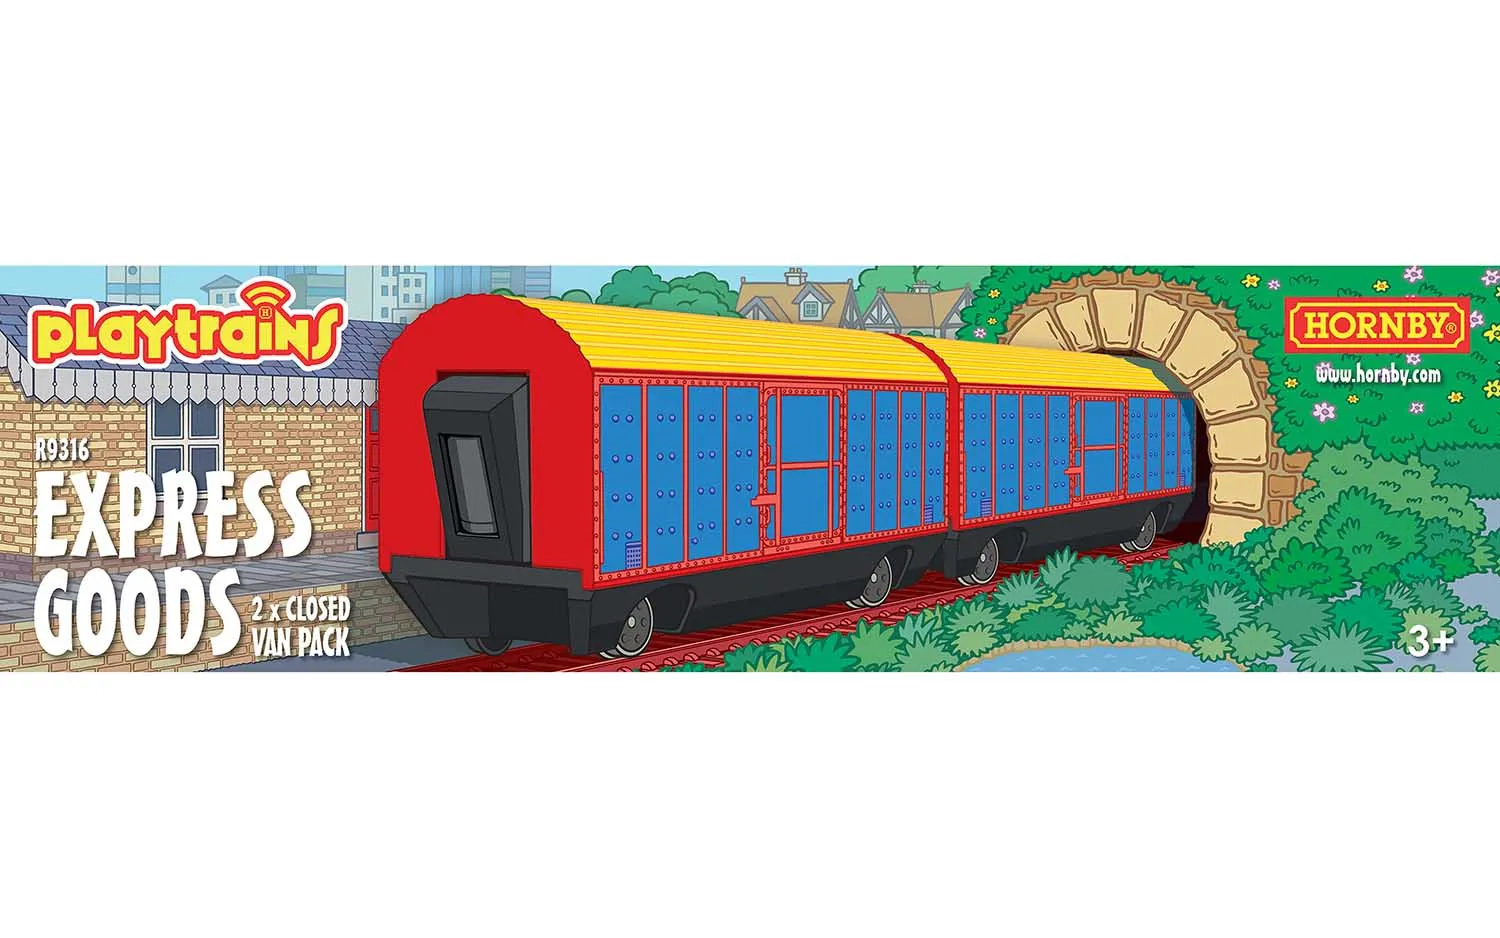 Playtrains - Express Goods 2 x Closed Wagon Pack